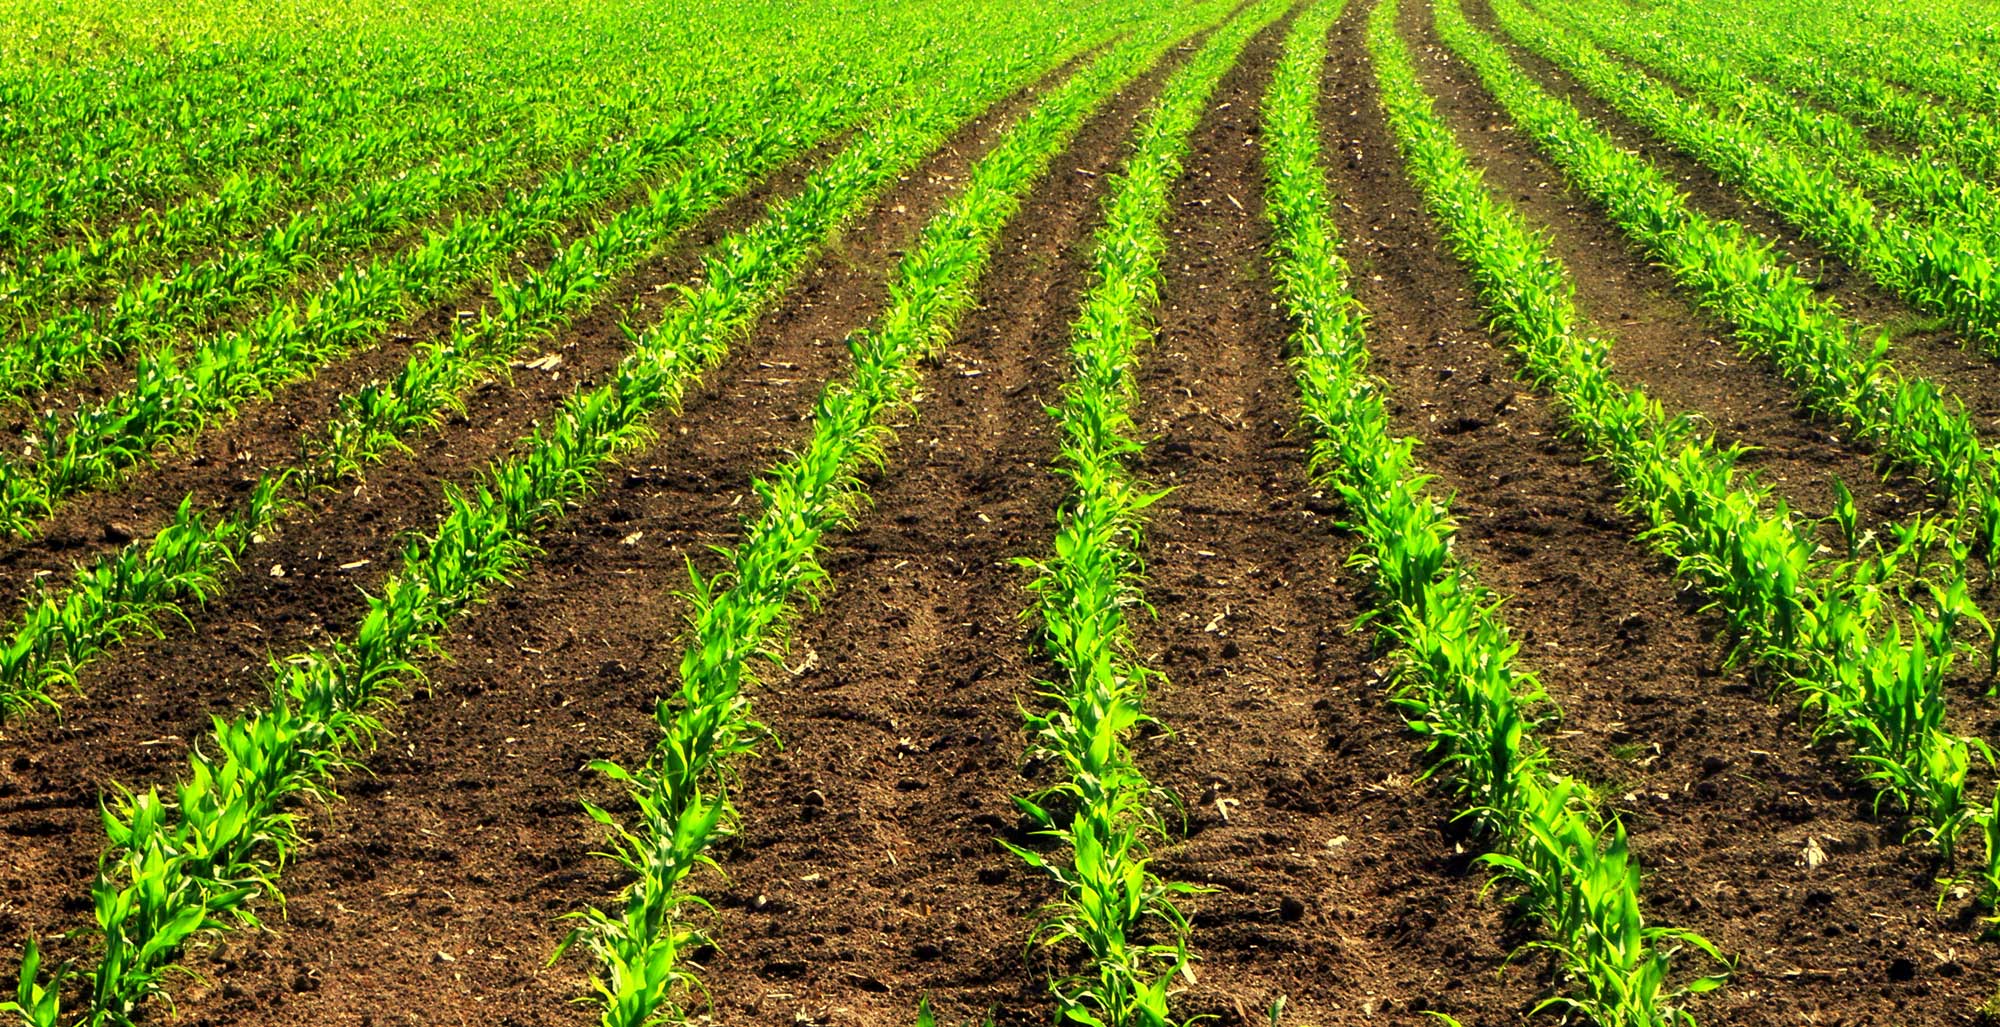 Photograph of young maize plants grows in rows in a cultivated field.